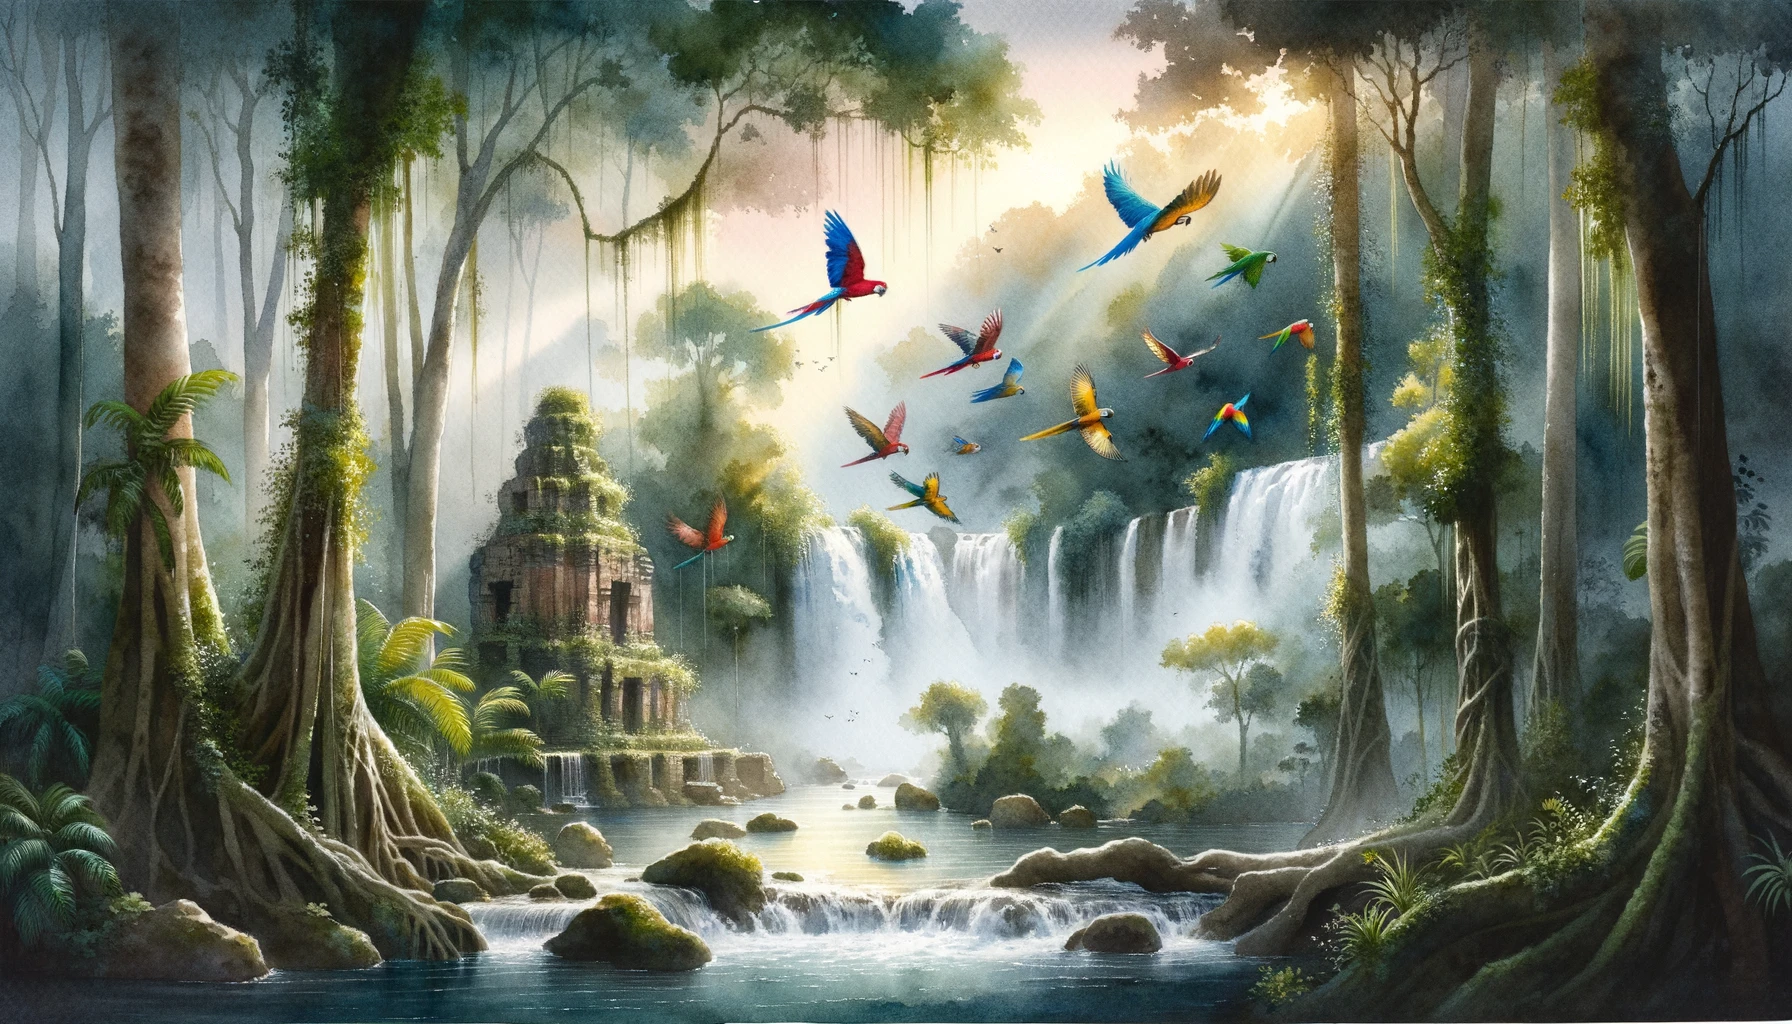 Watercolor painting of a tranquil rainforest scene at dawn. The atmosphere is misty, with light filtering through the trees. Parrots of various colors, like blue, gold, and scarlet, take flight, adding life to the scene. Below, waterfalls create white streaks as they plunge into ponds. Not far from a waterfall, the ruins of an old temple emerge from the jungle, covered in moss and vines.